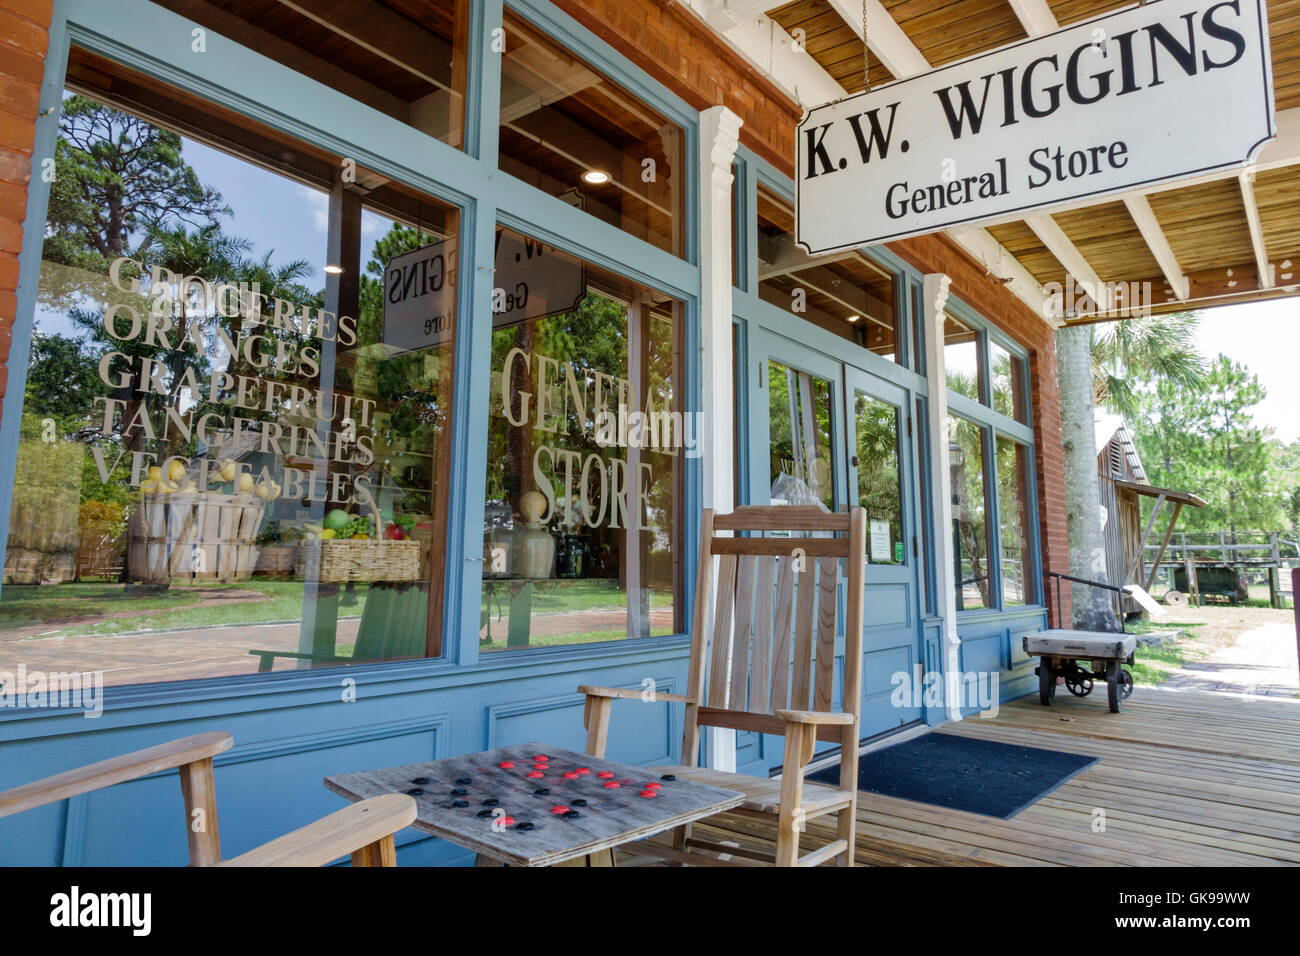 Bradenton Florida,Manatee Village historical Park,open-air museum,Wiggins General Store,1903,local heritage,settlement history,education,restored buil Stock Photo